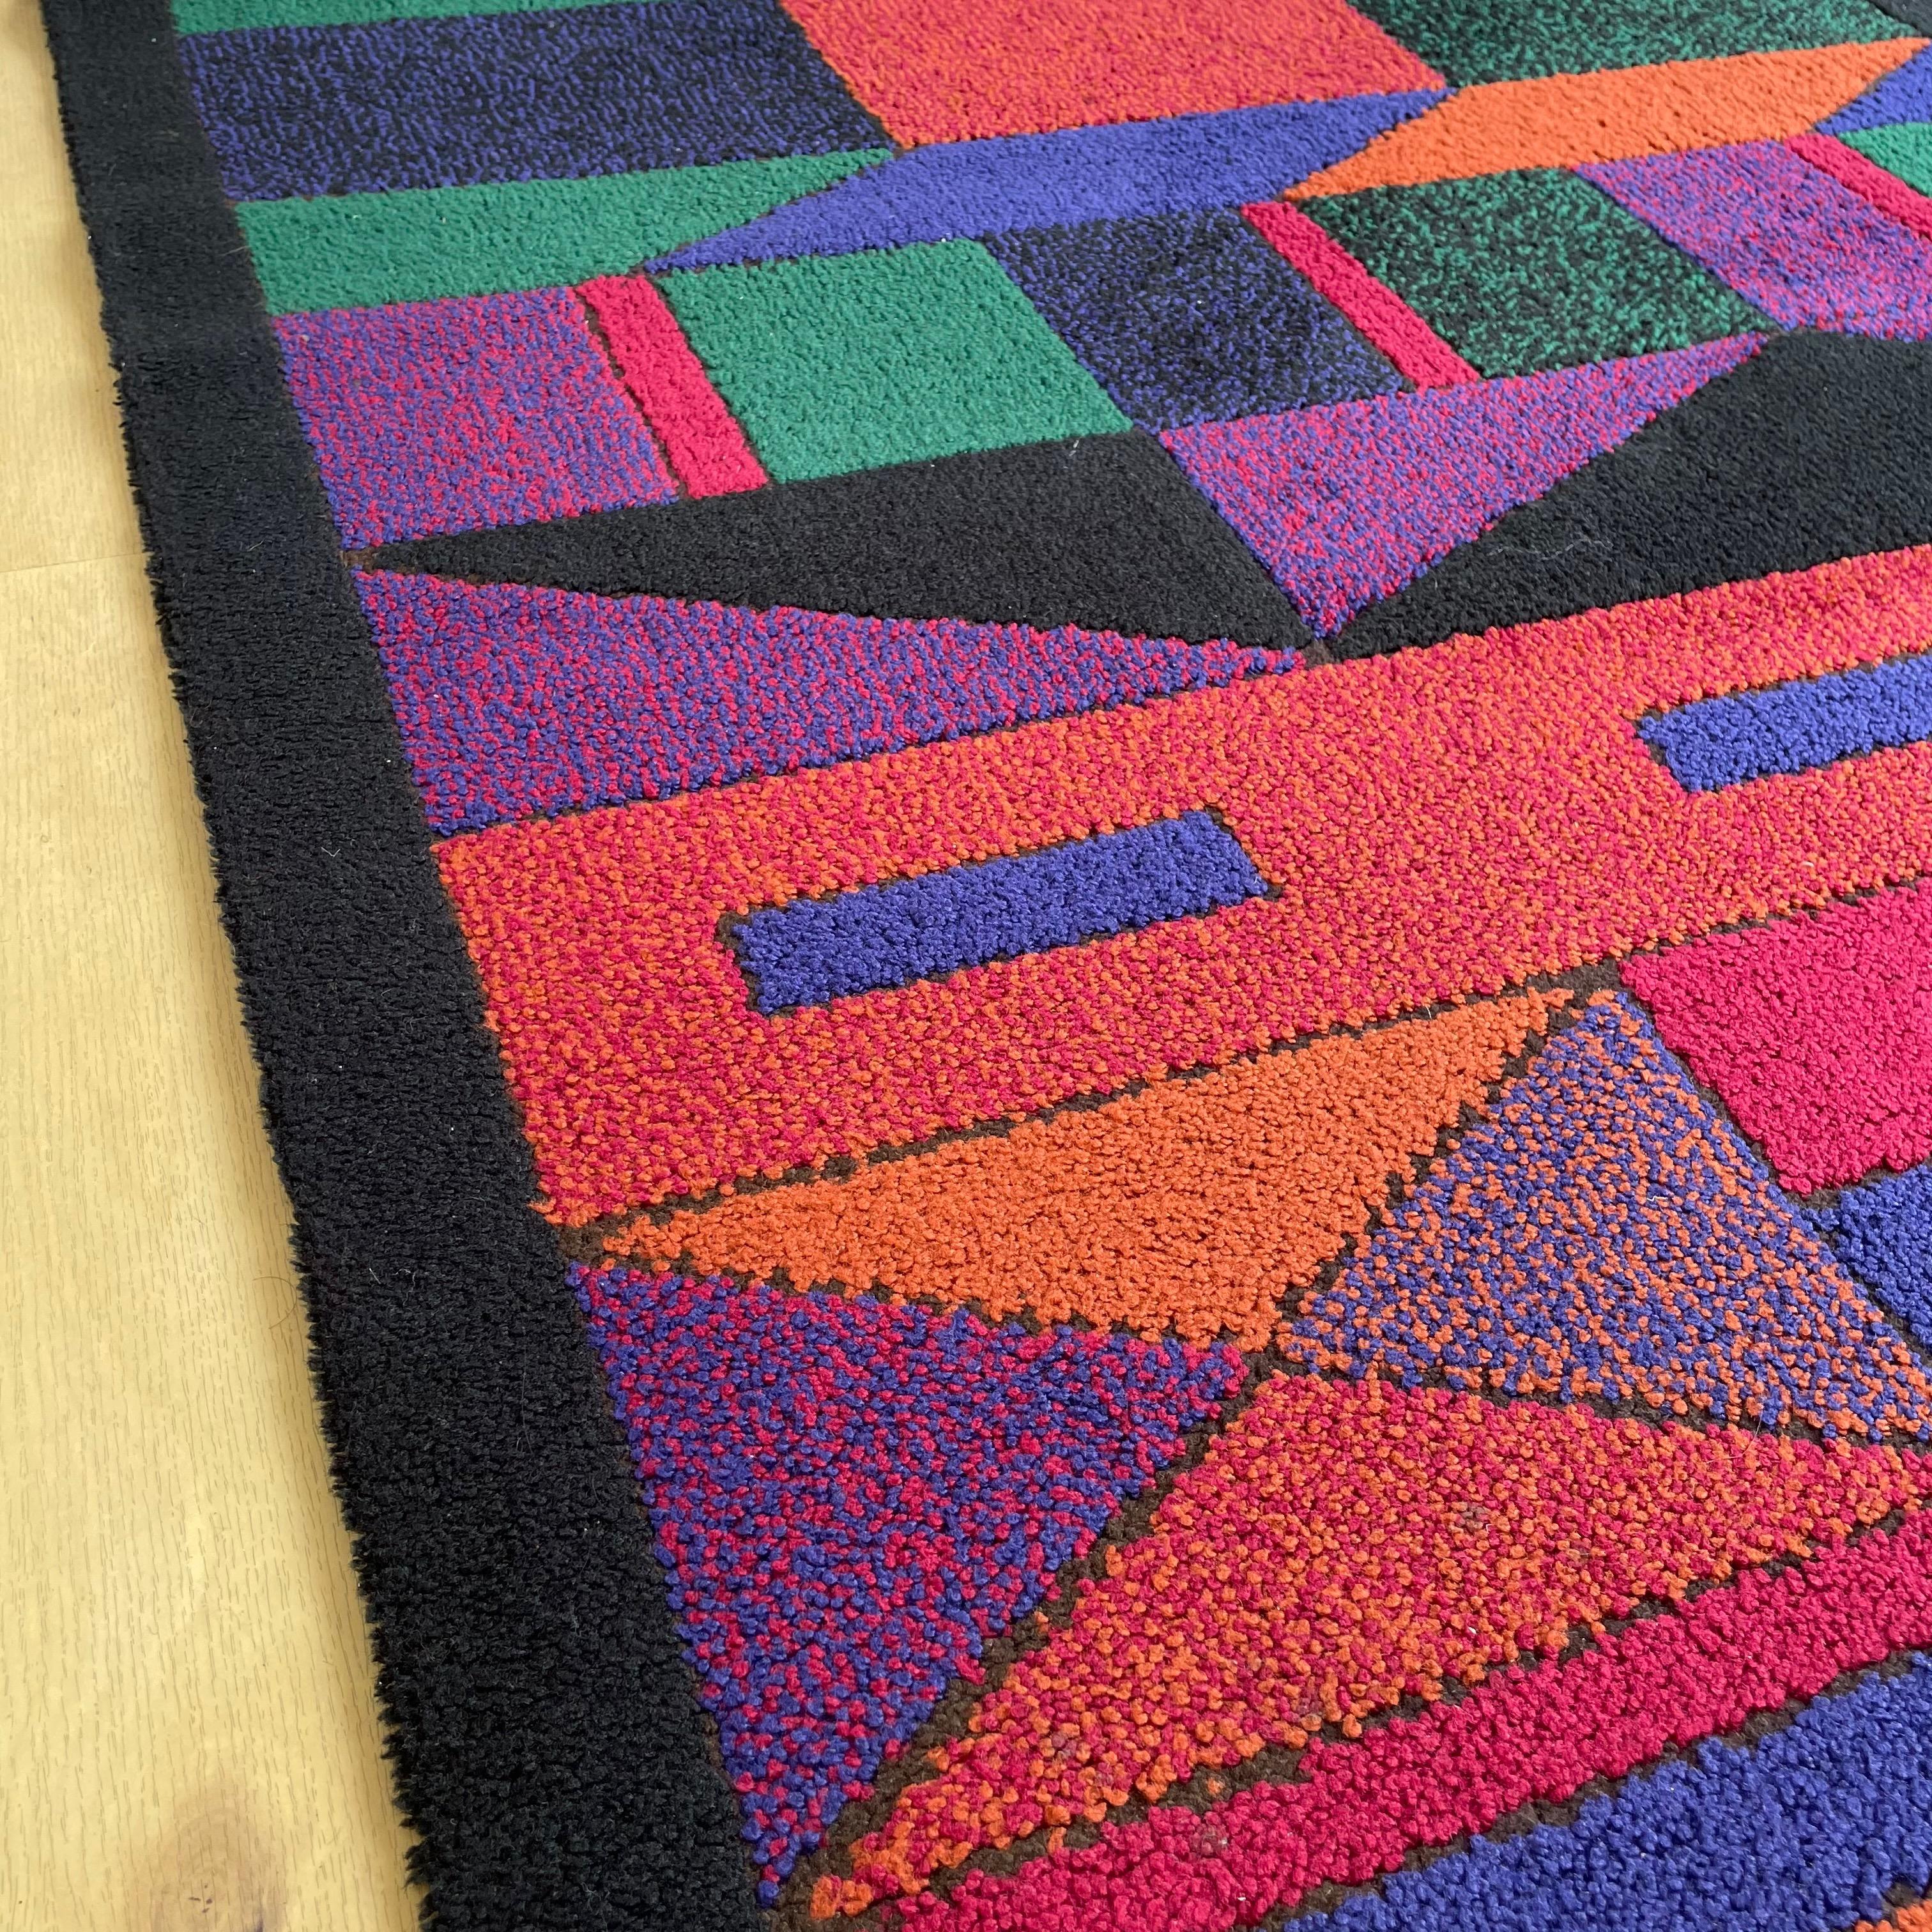 Psychedelic Memphis Style abstract Rug Carpet by Atrium Tefzet, Germany 1980s For Sale 10